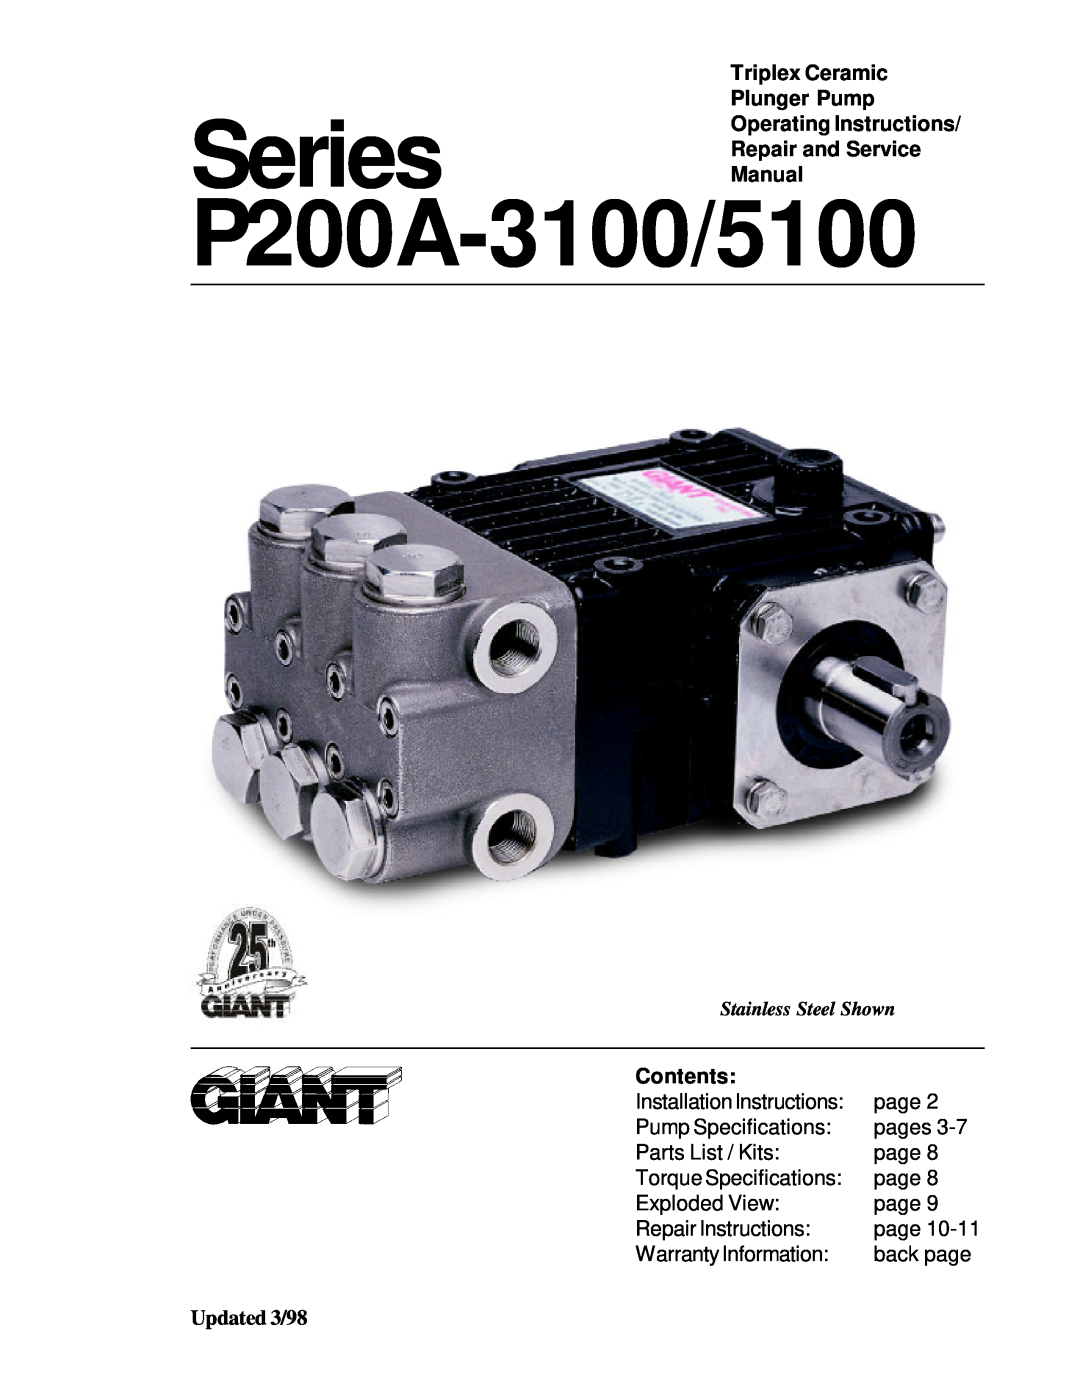 Giant Triplex Ceramic Plunger Pump installation instructions P200A-3100/5100, Manual, Contents, Updated 3/98 